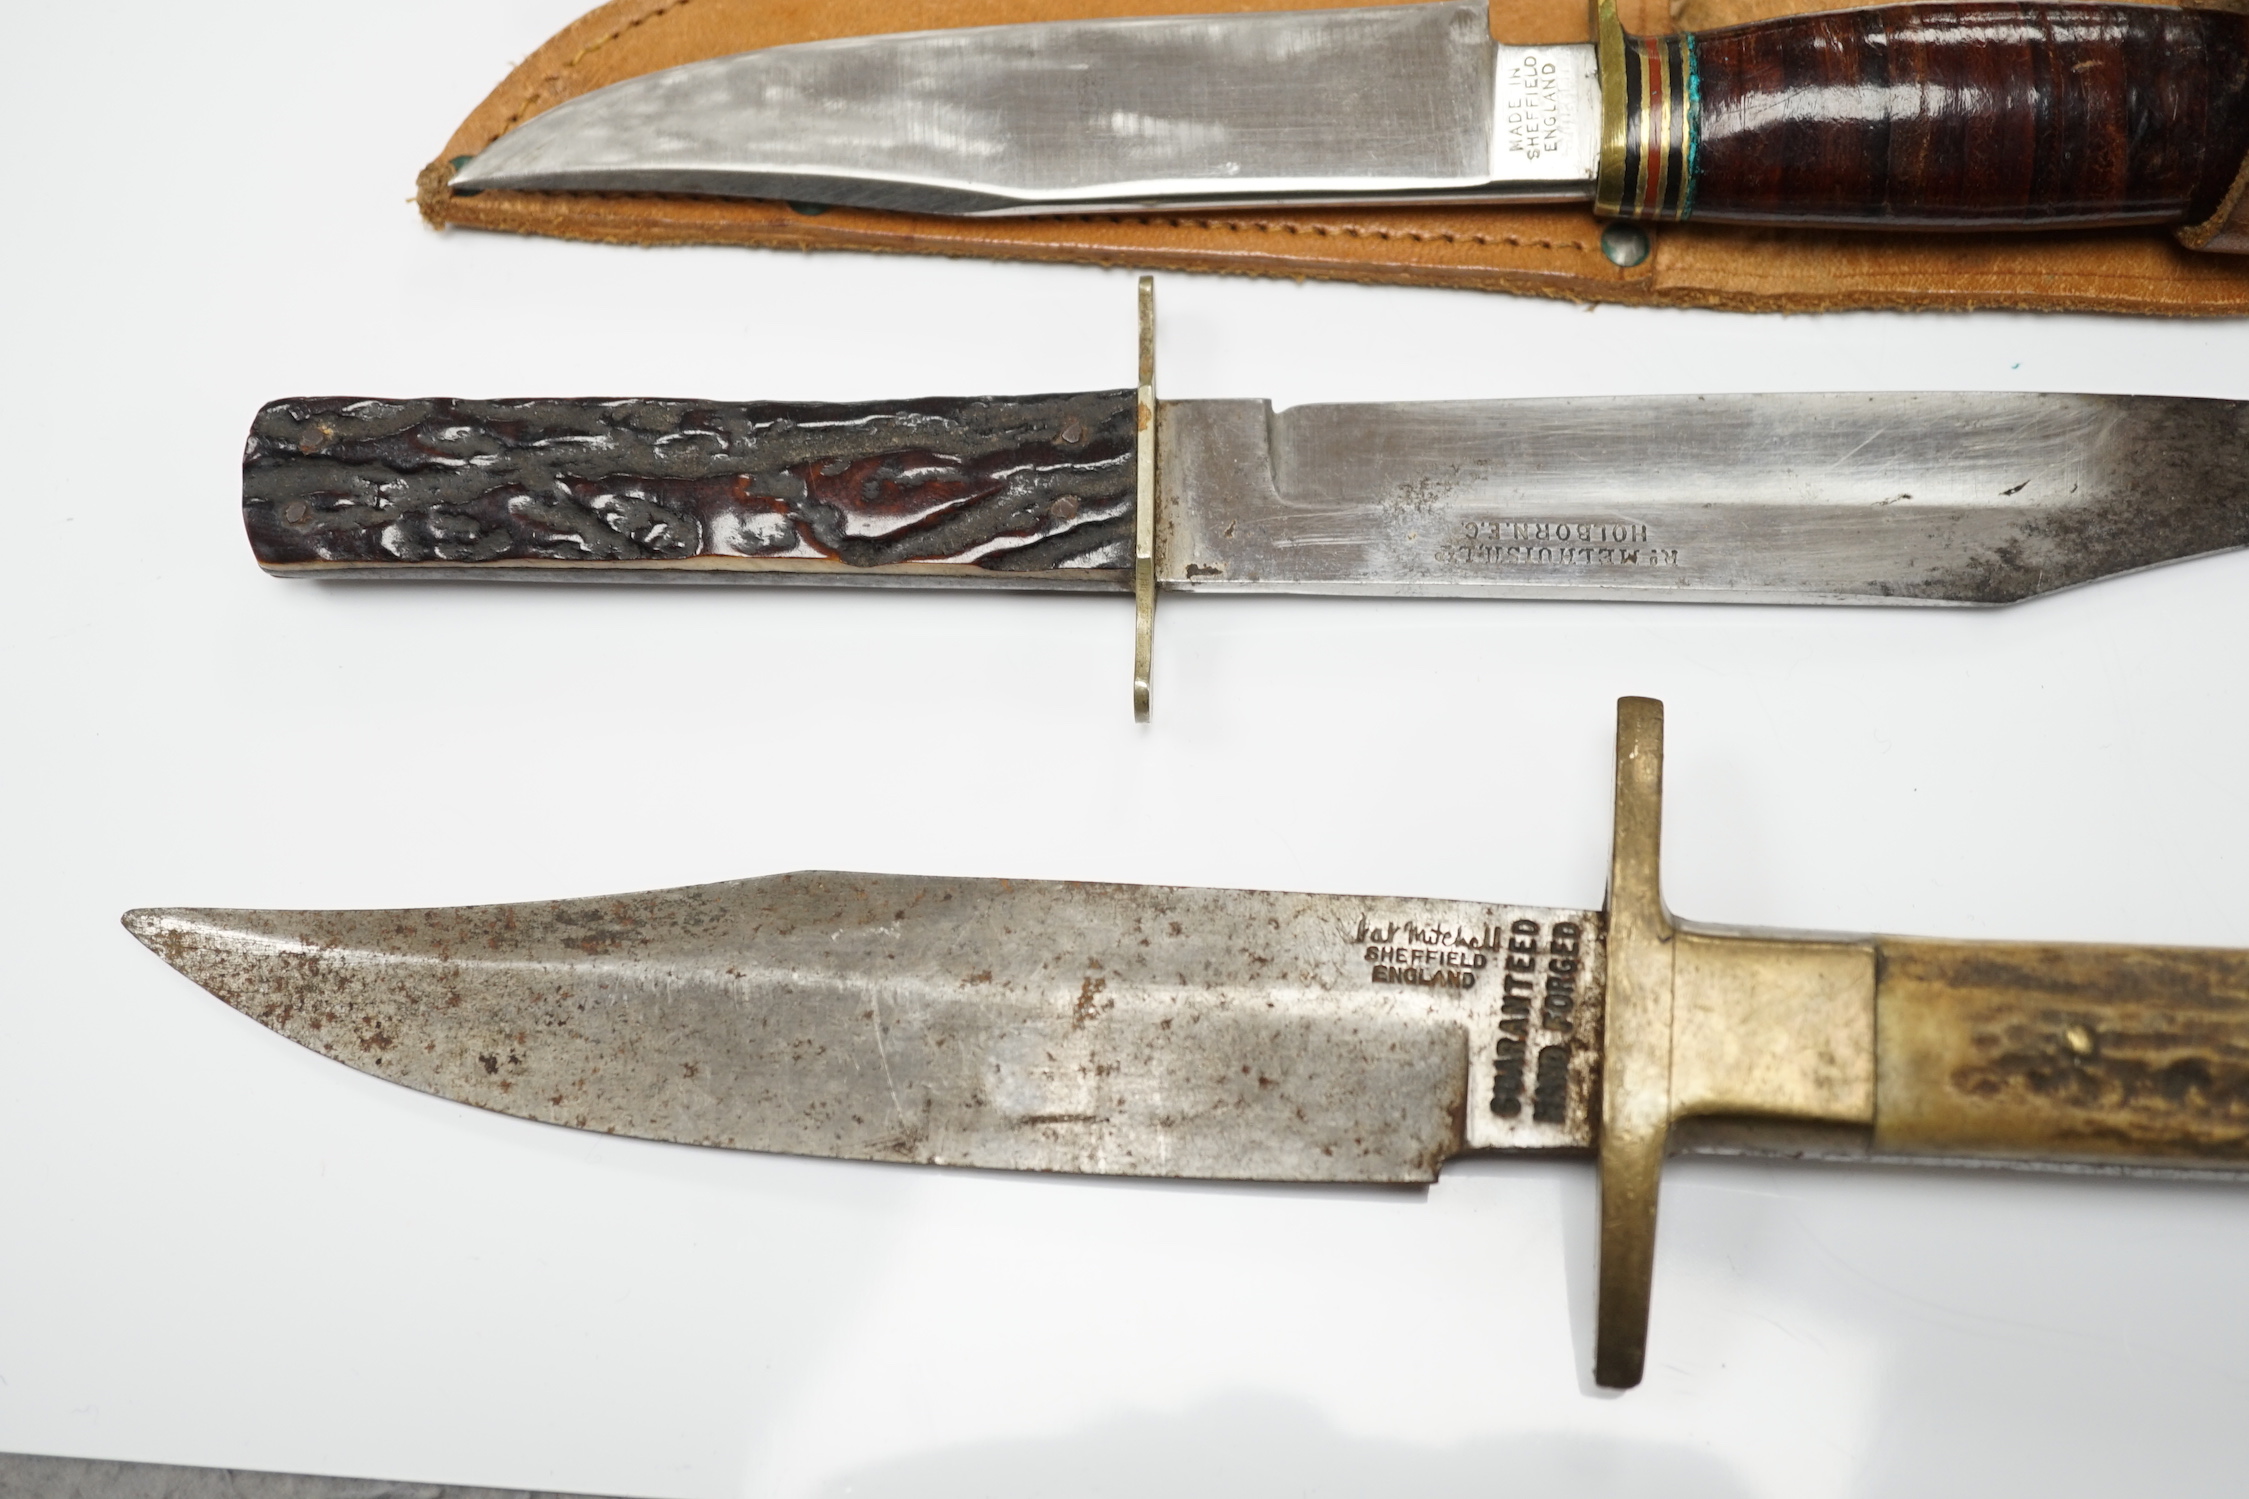 Two antler-handled hunting knives and three other knives